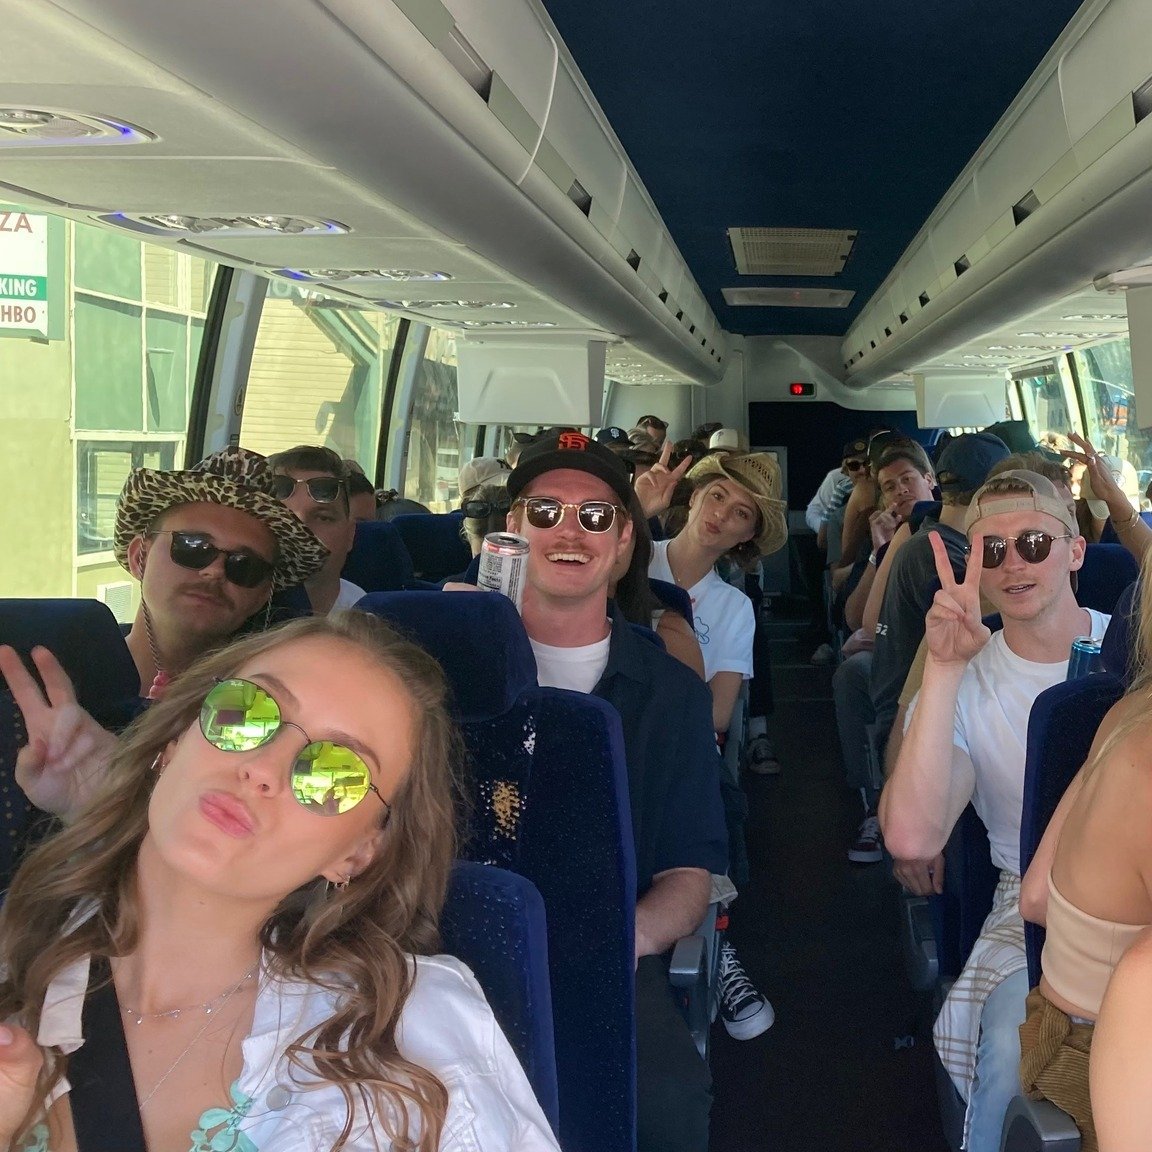 Safe, affordable and FUN luxury party buses traveling from San Francisco to BOTTLEROCK May 24-26. Ride with us and upgrade your festival experience! 🥳🚌

⚡️1 Day or 3 Day shuttle passes available. 
⚡️Depart 10:30 am and 1 pm from the Marina District